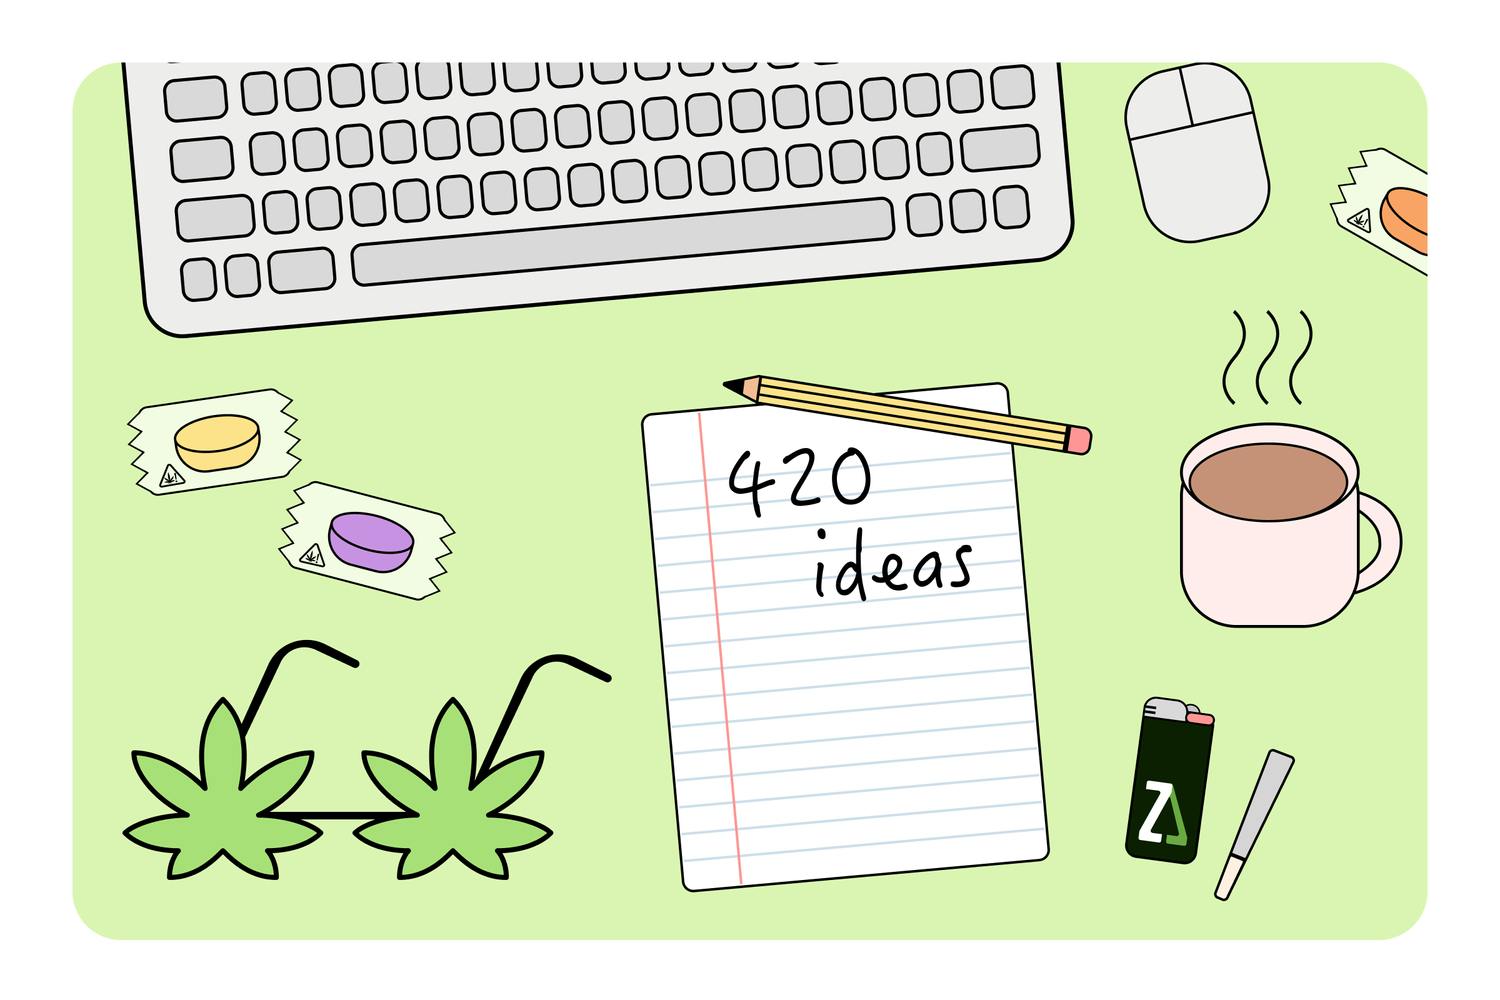 An illustration shows the desk of a cannabis retailer - a Treez logo lighter and preroll, coffee, novelty glasses, edibles and a notebook with the words "420 ideas" written on it lay on the desk, alongside a computer and mouse